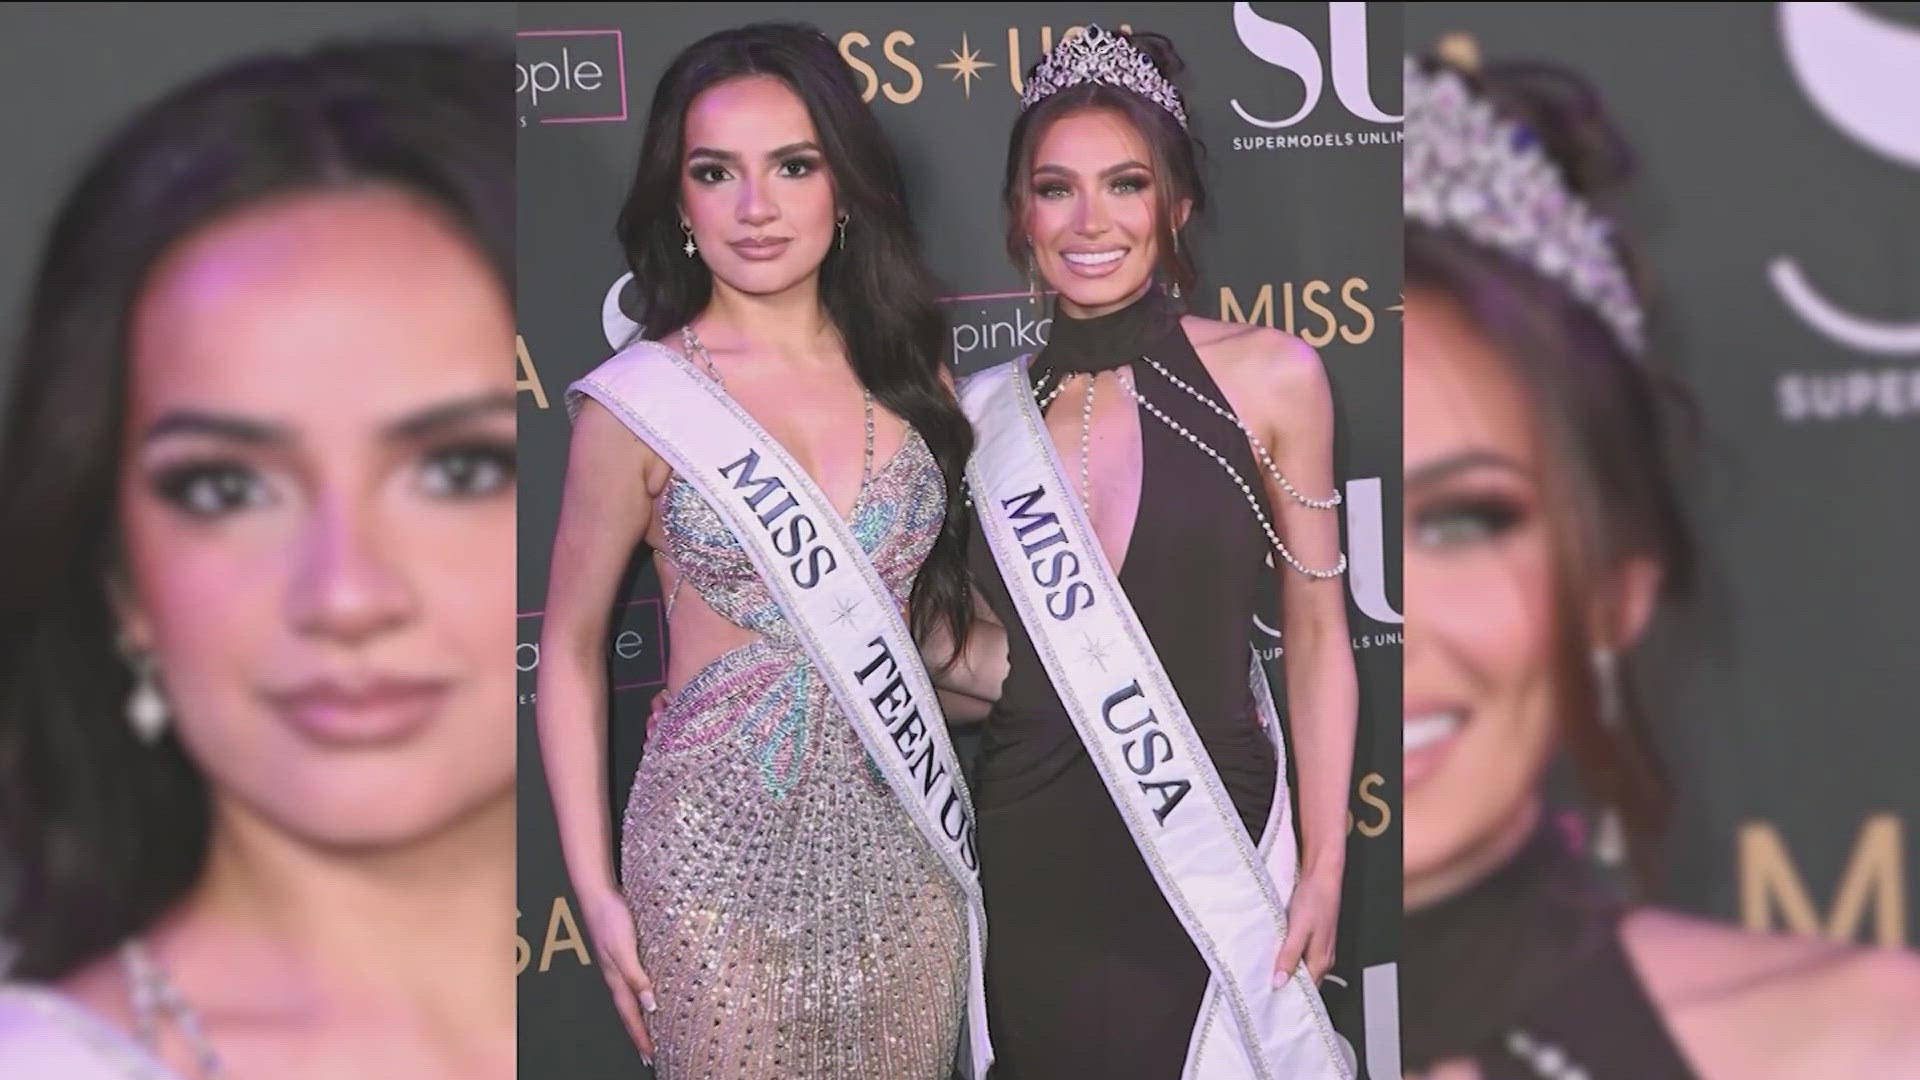 The mothers said that former Miss USA Noelia Voigt and Miss Teen USA UmaSofia Srivastava were ill-treated, bullied and abused.